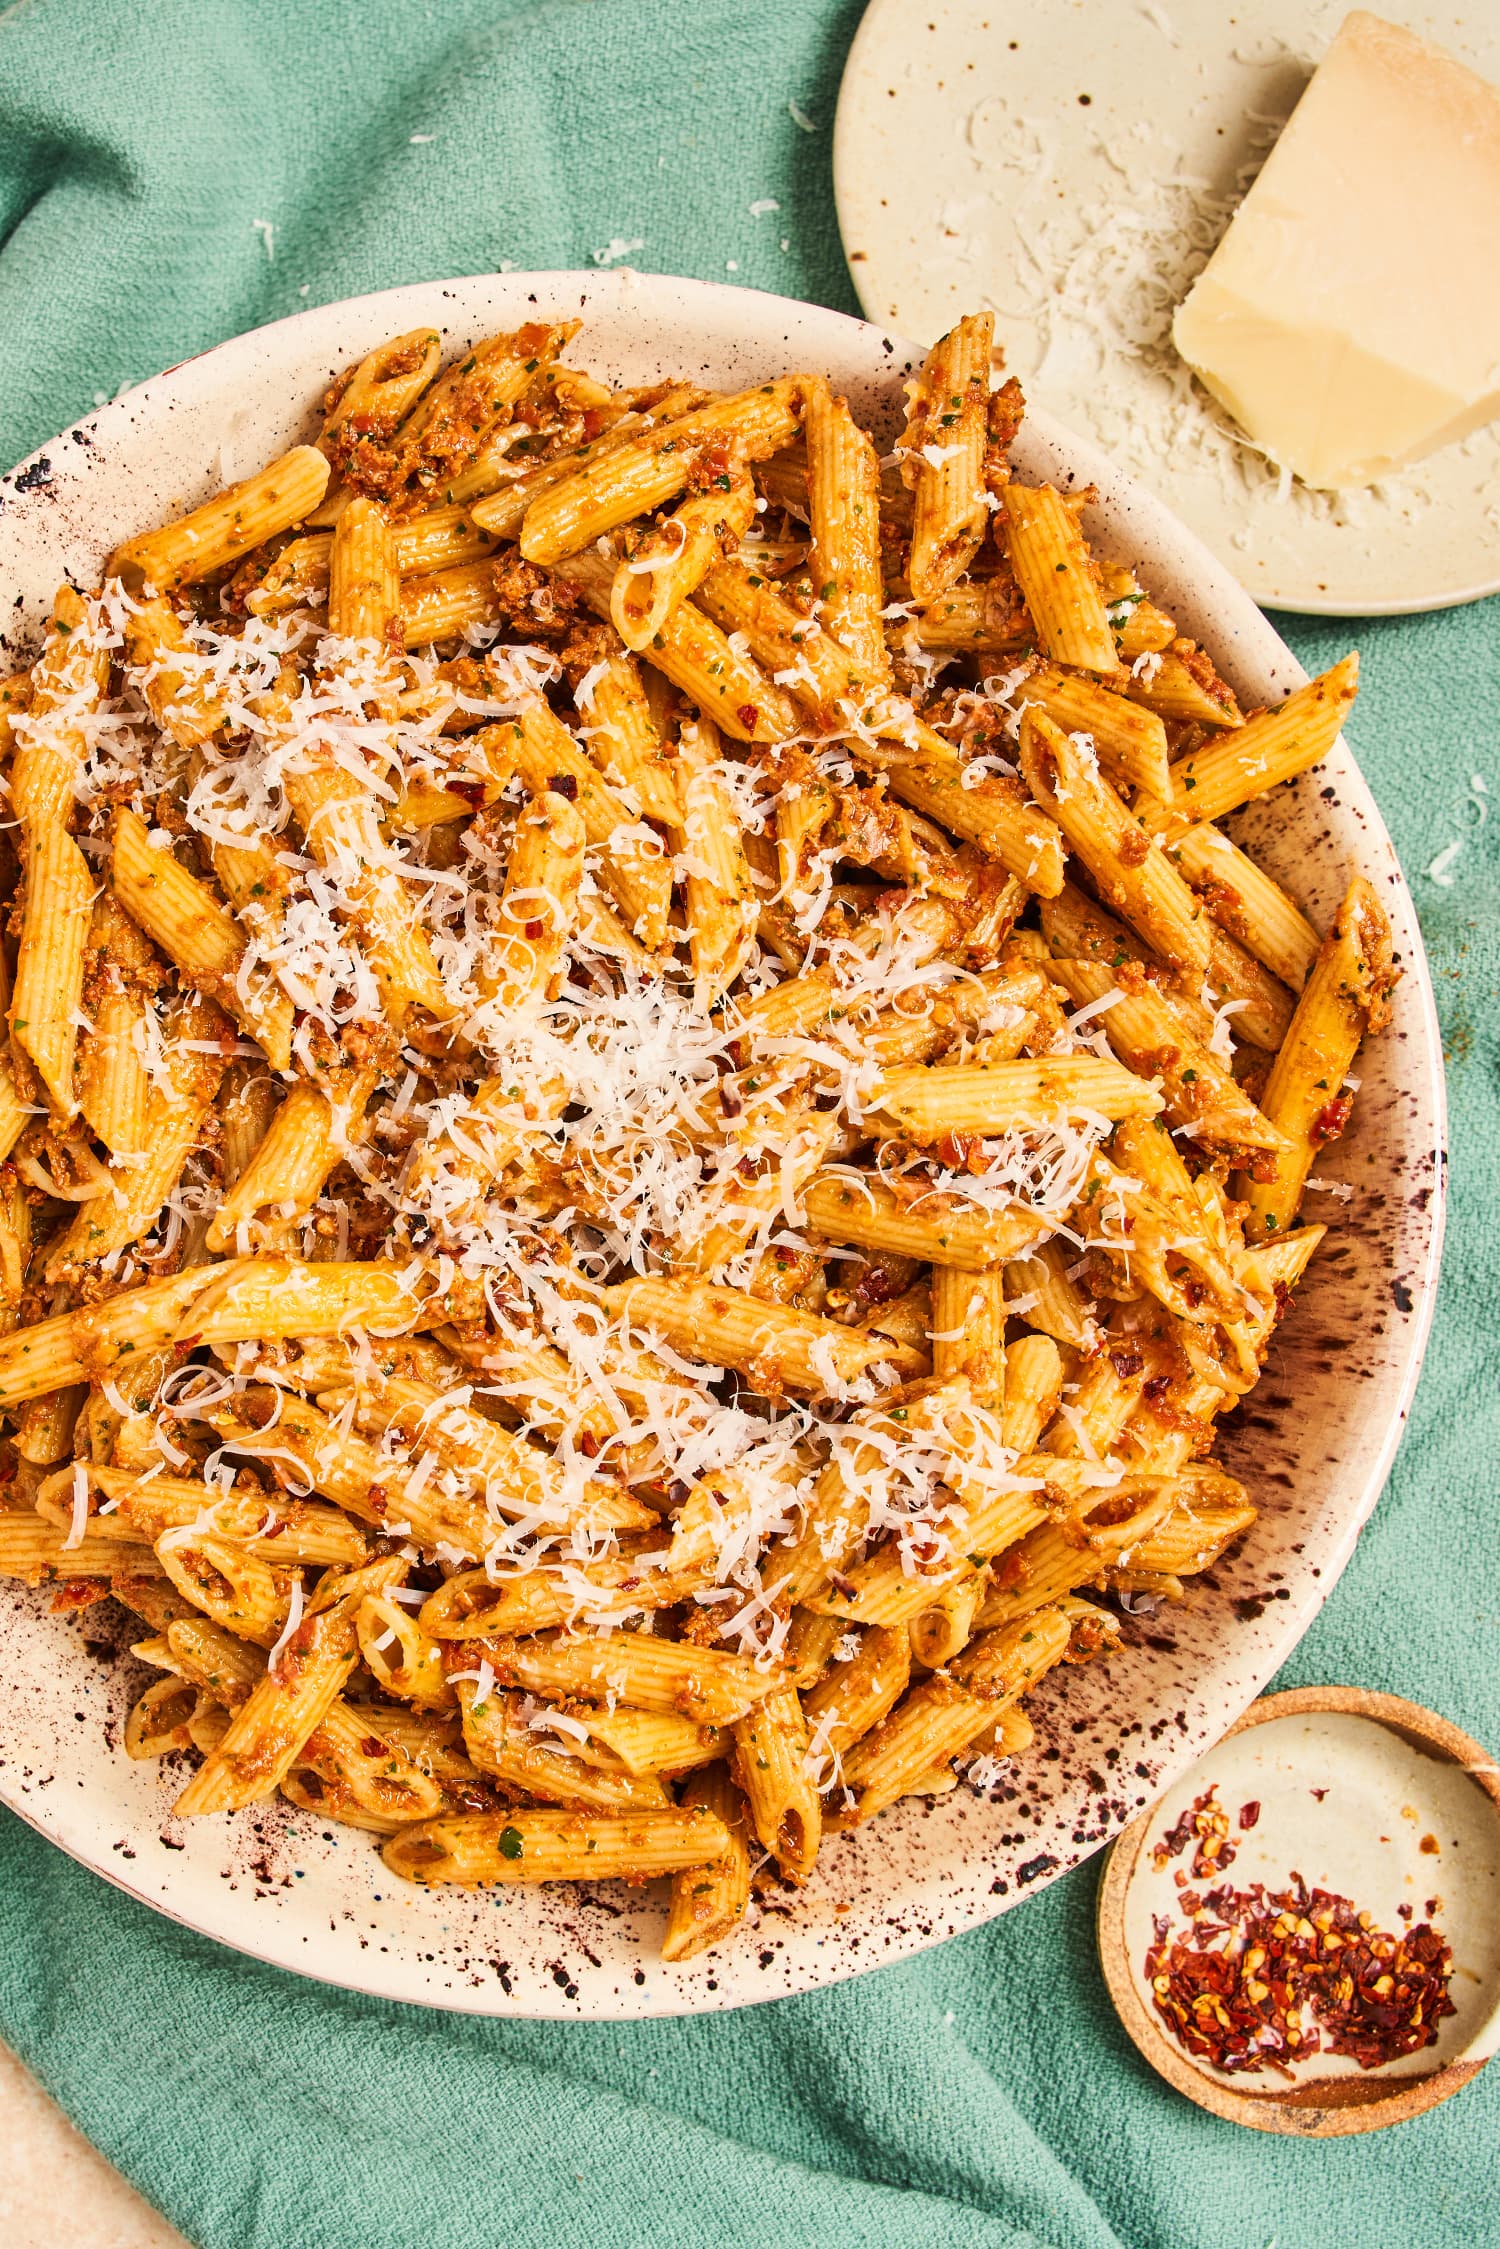 A '90s Pantry Staple Makes a Much-Deserved Comeback in This Super-Easy Pasta